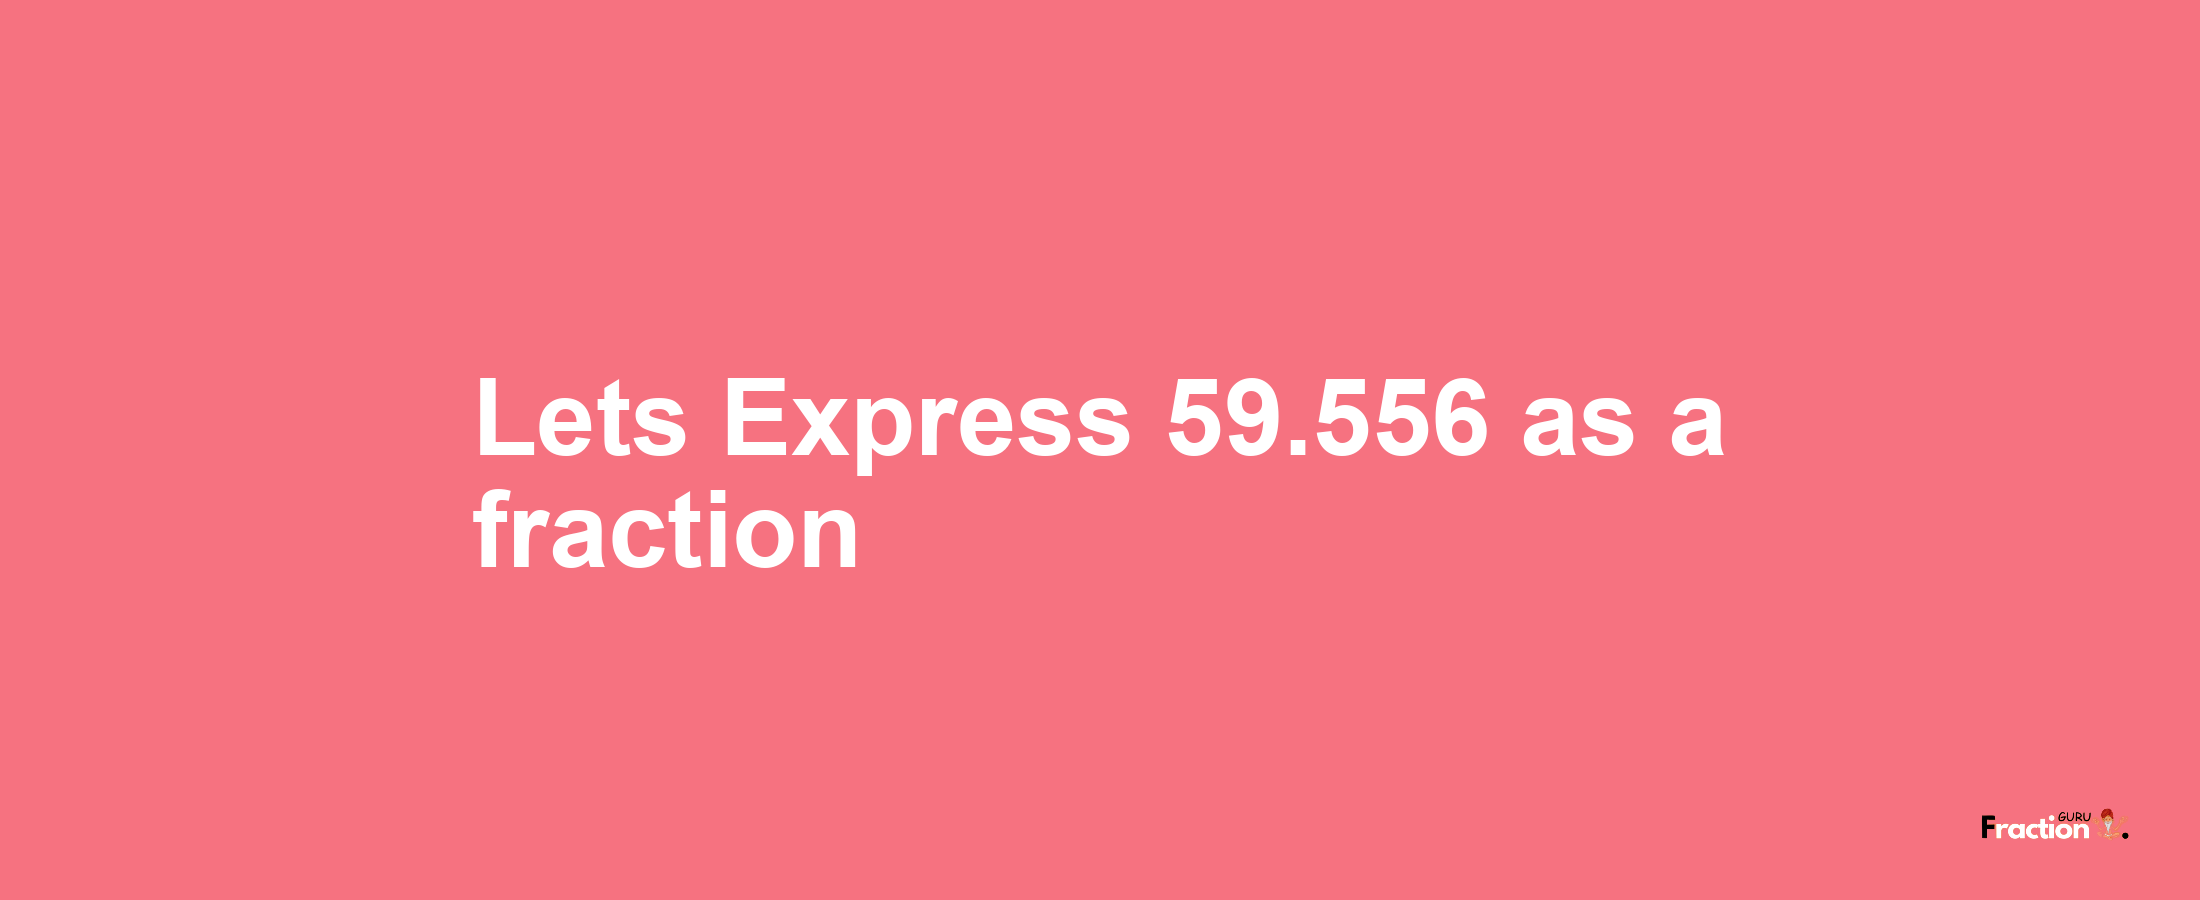 Lets Express 59.556 as afraction